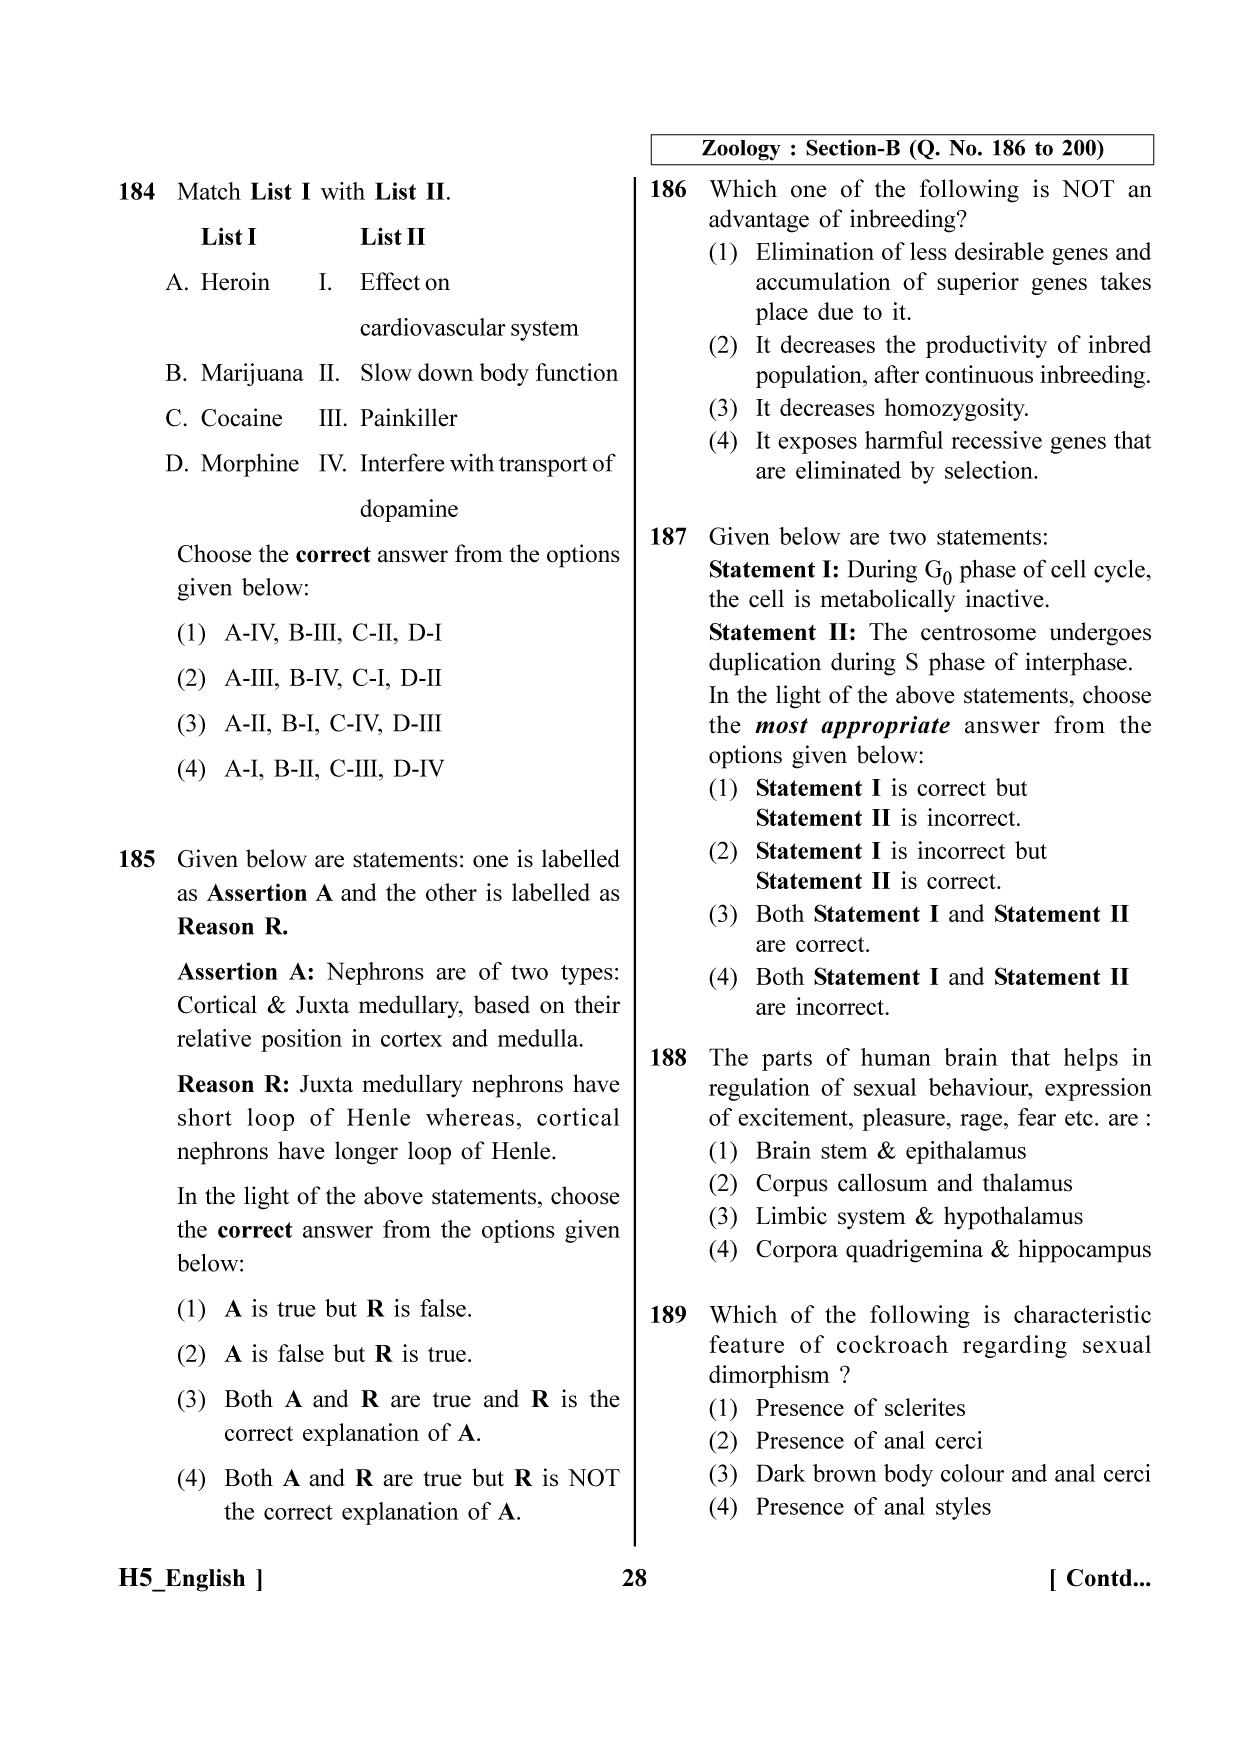 NEET 2023 H5 Question Paper - Page 28